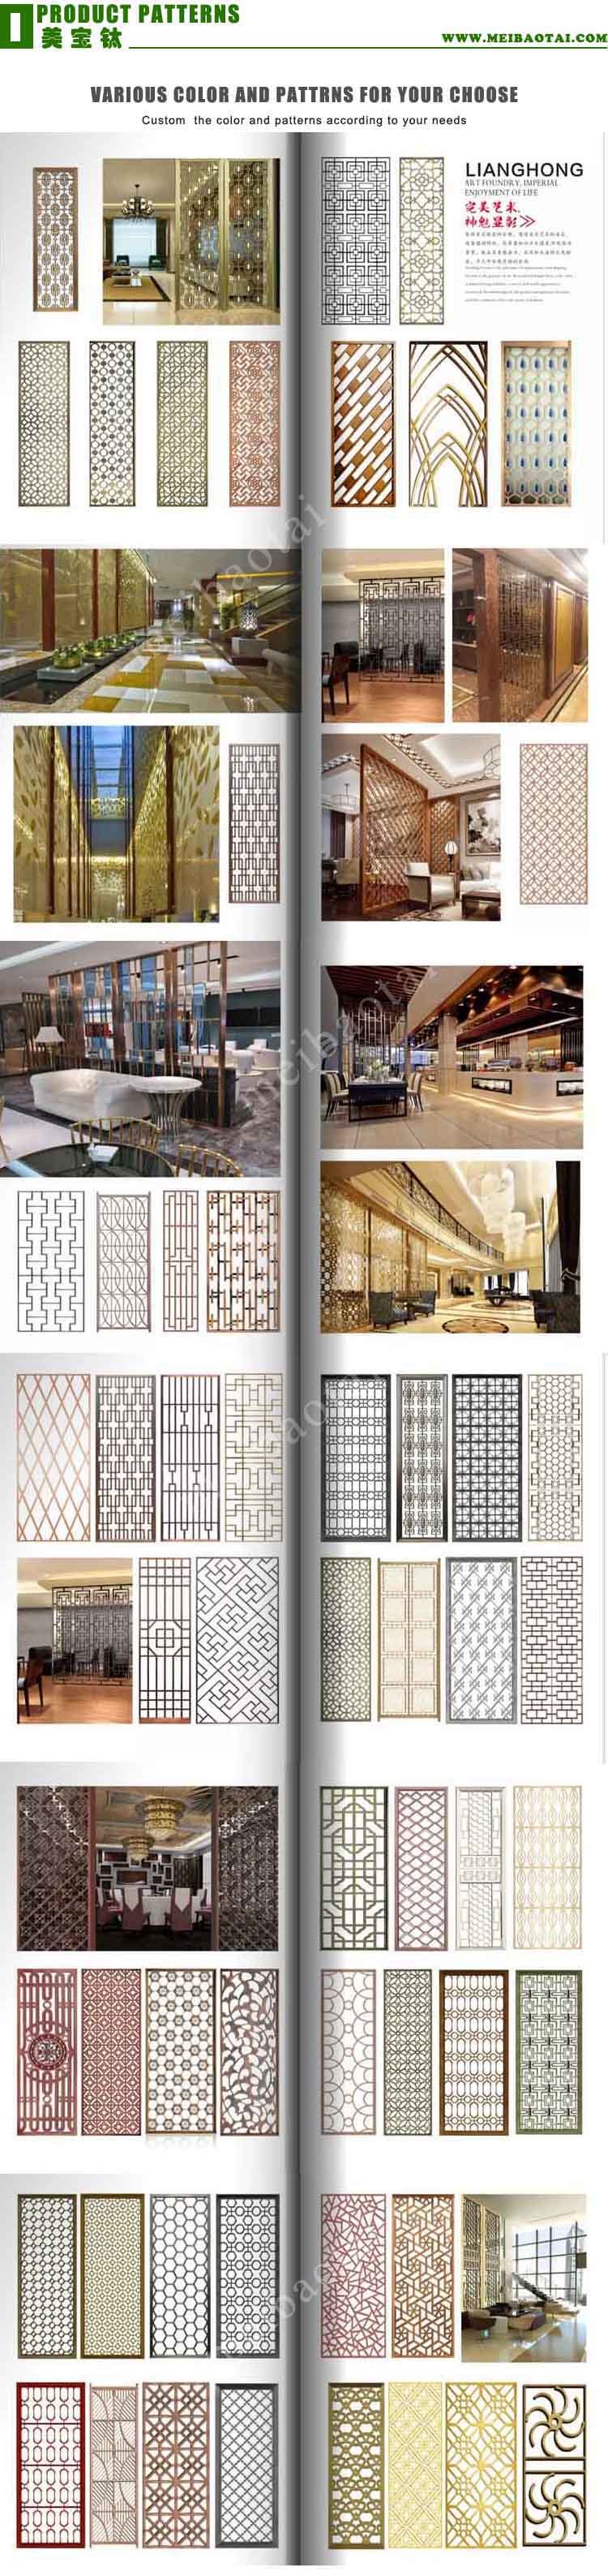 304 Stainless Steel Sheet Engrave Stainless Steel Screen Partition